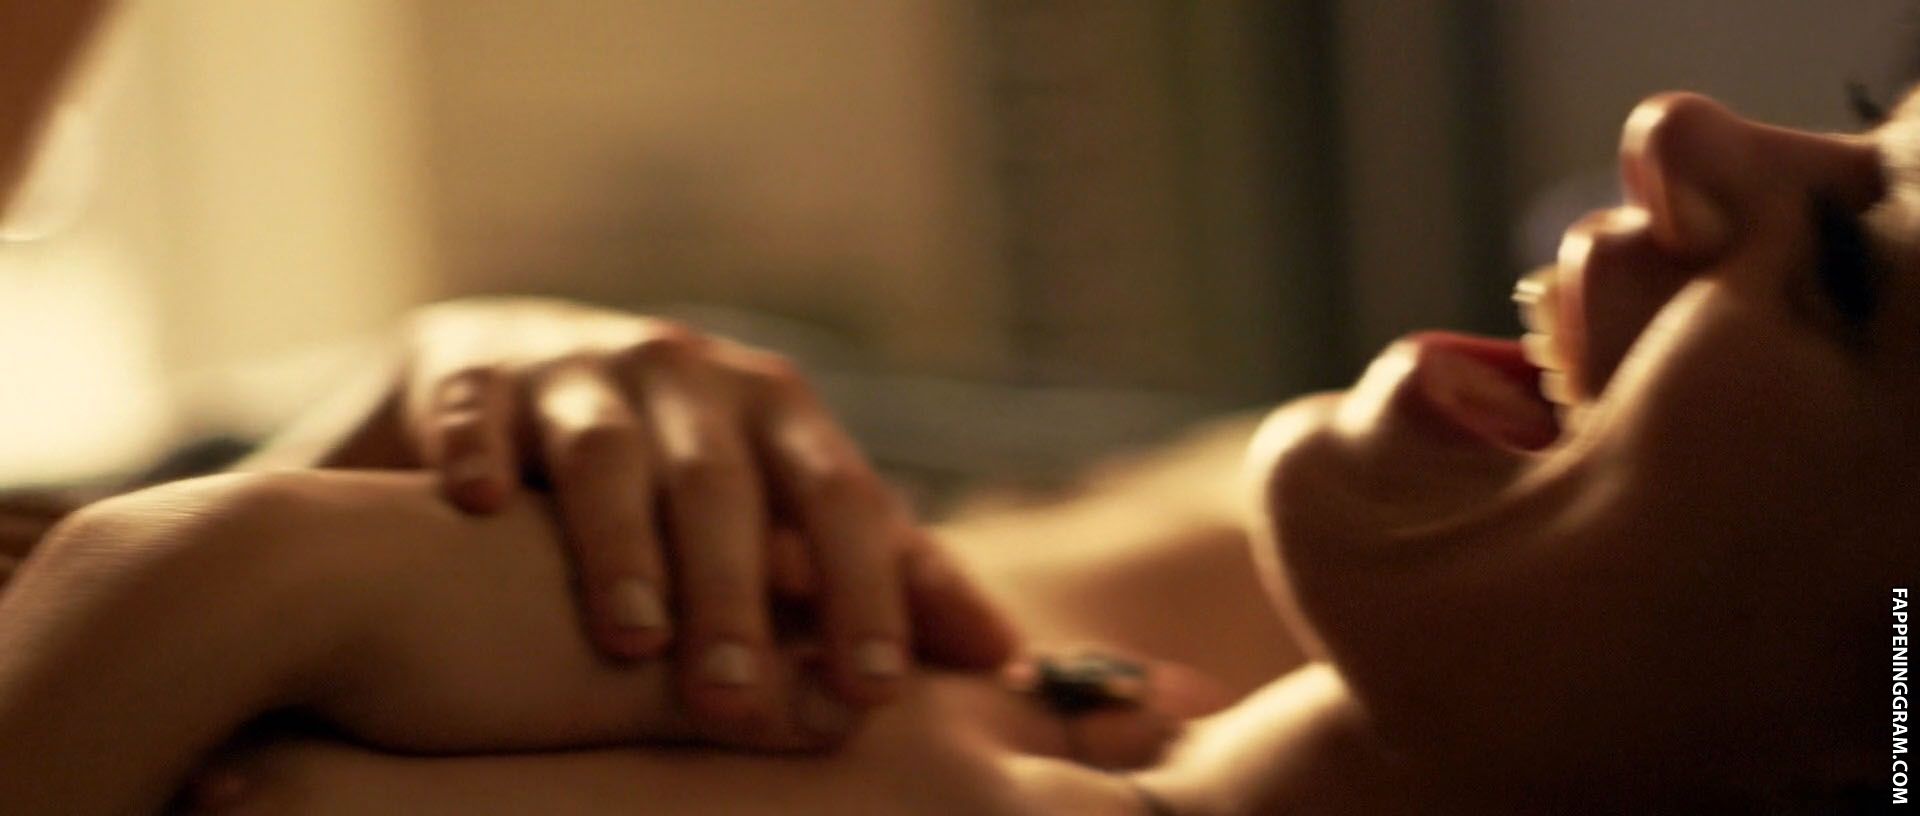 Lindsey shaw sex tape.